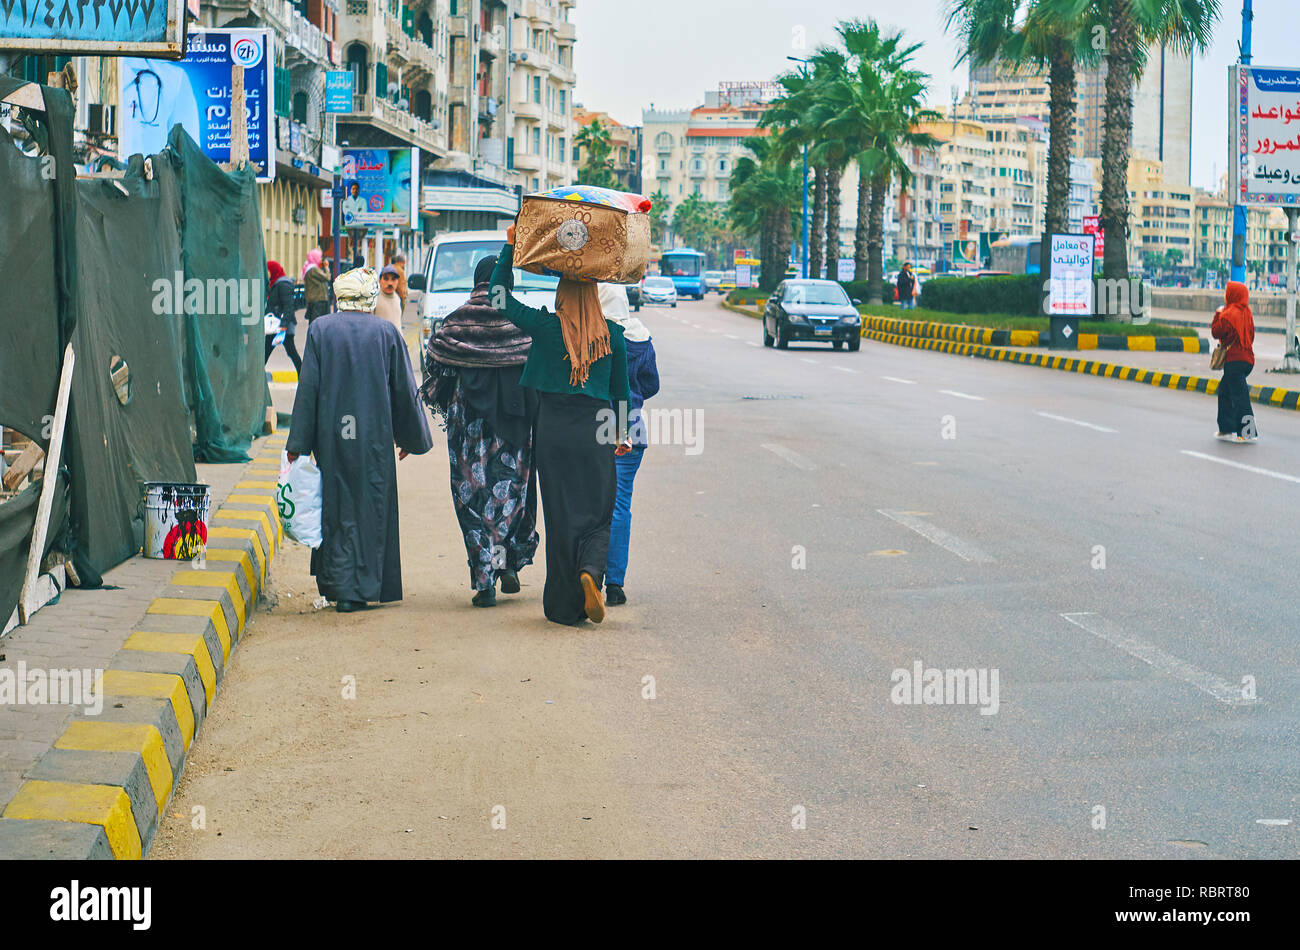 ALEXANDRIA, EGYPT - DECEMBER 19, 2017: The group of locals walks along the road in Corniche Avenue, young woman carries the bag on her head, on Decemb Stock Photo